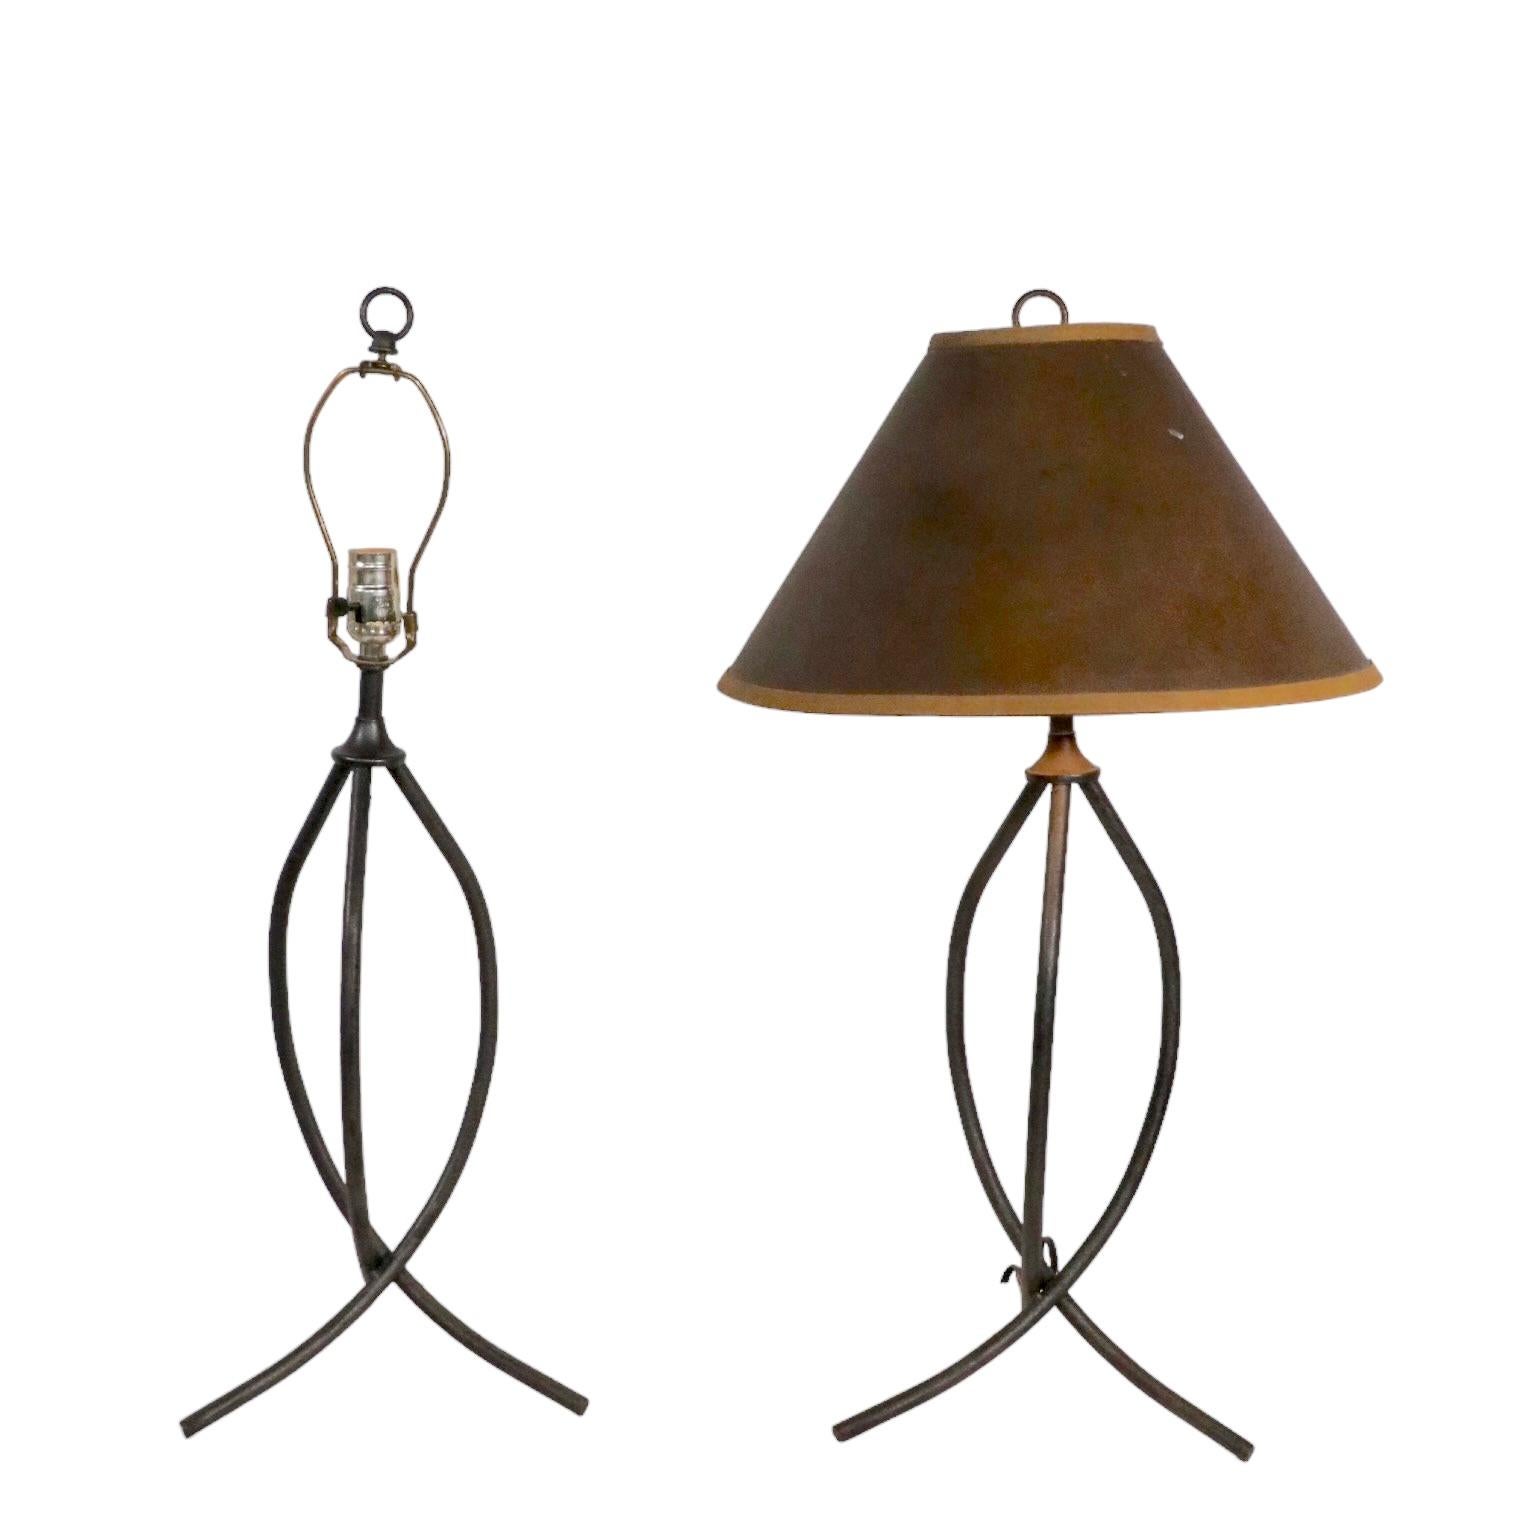 Chic architectural table lamps of intertwined wrought iron legs. The lamps are in very good original condition, clean, working, ready to use condition, showing only light cosmetic wear, normal and consistent with age - shade not included. Design